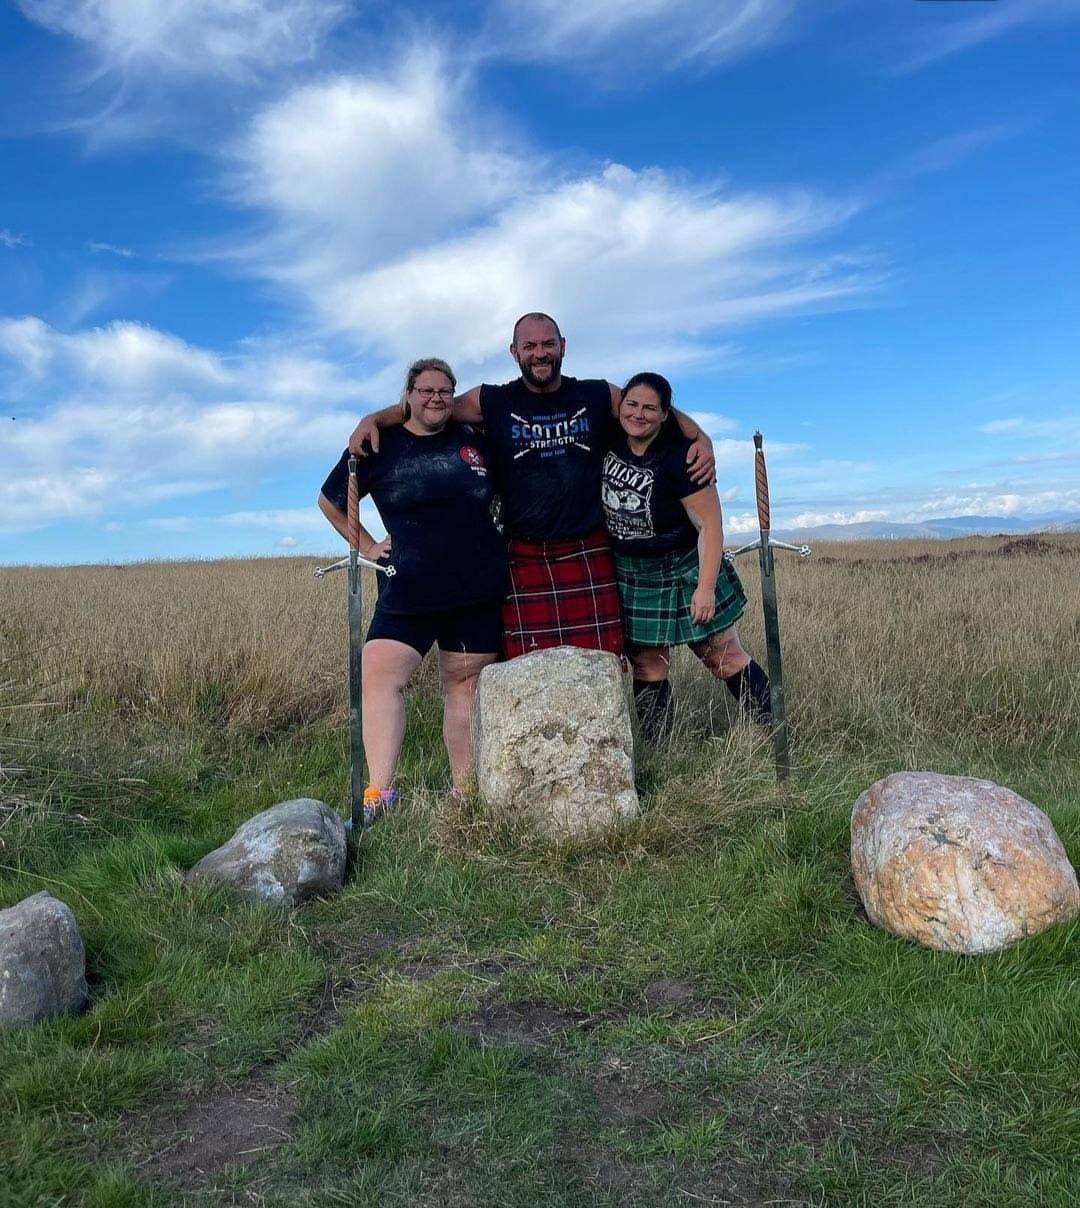 A man stands with two women. They are surrounded by some stones in Sherriffmuir.